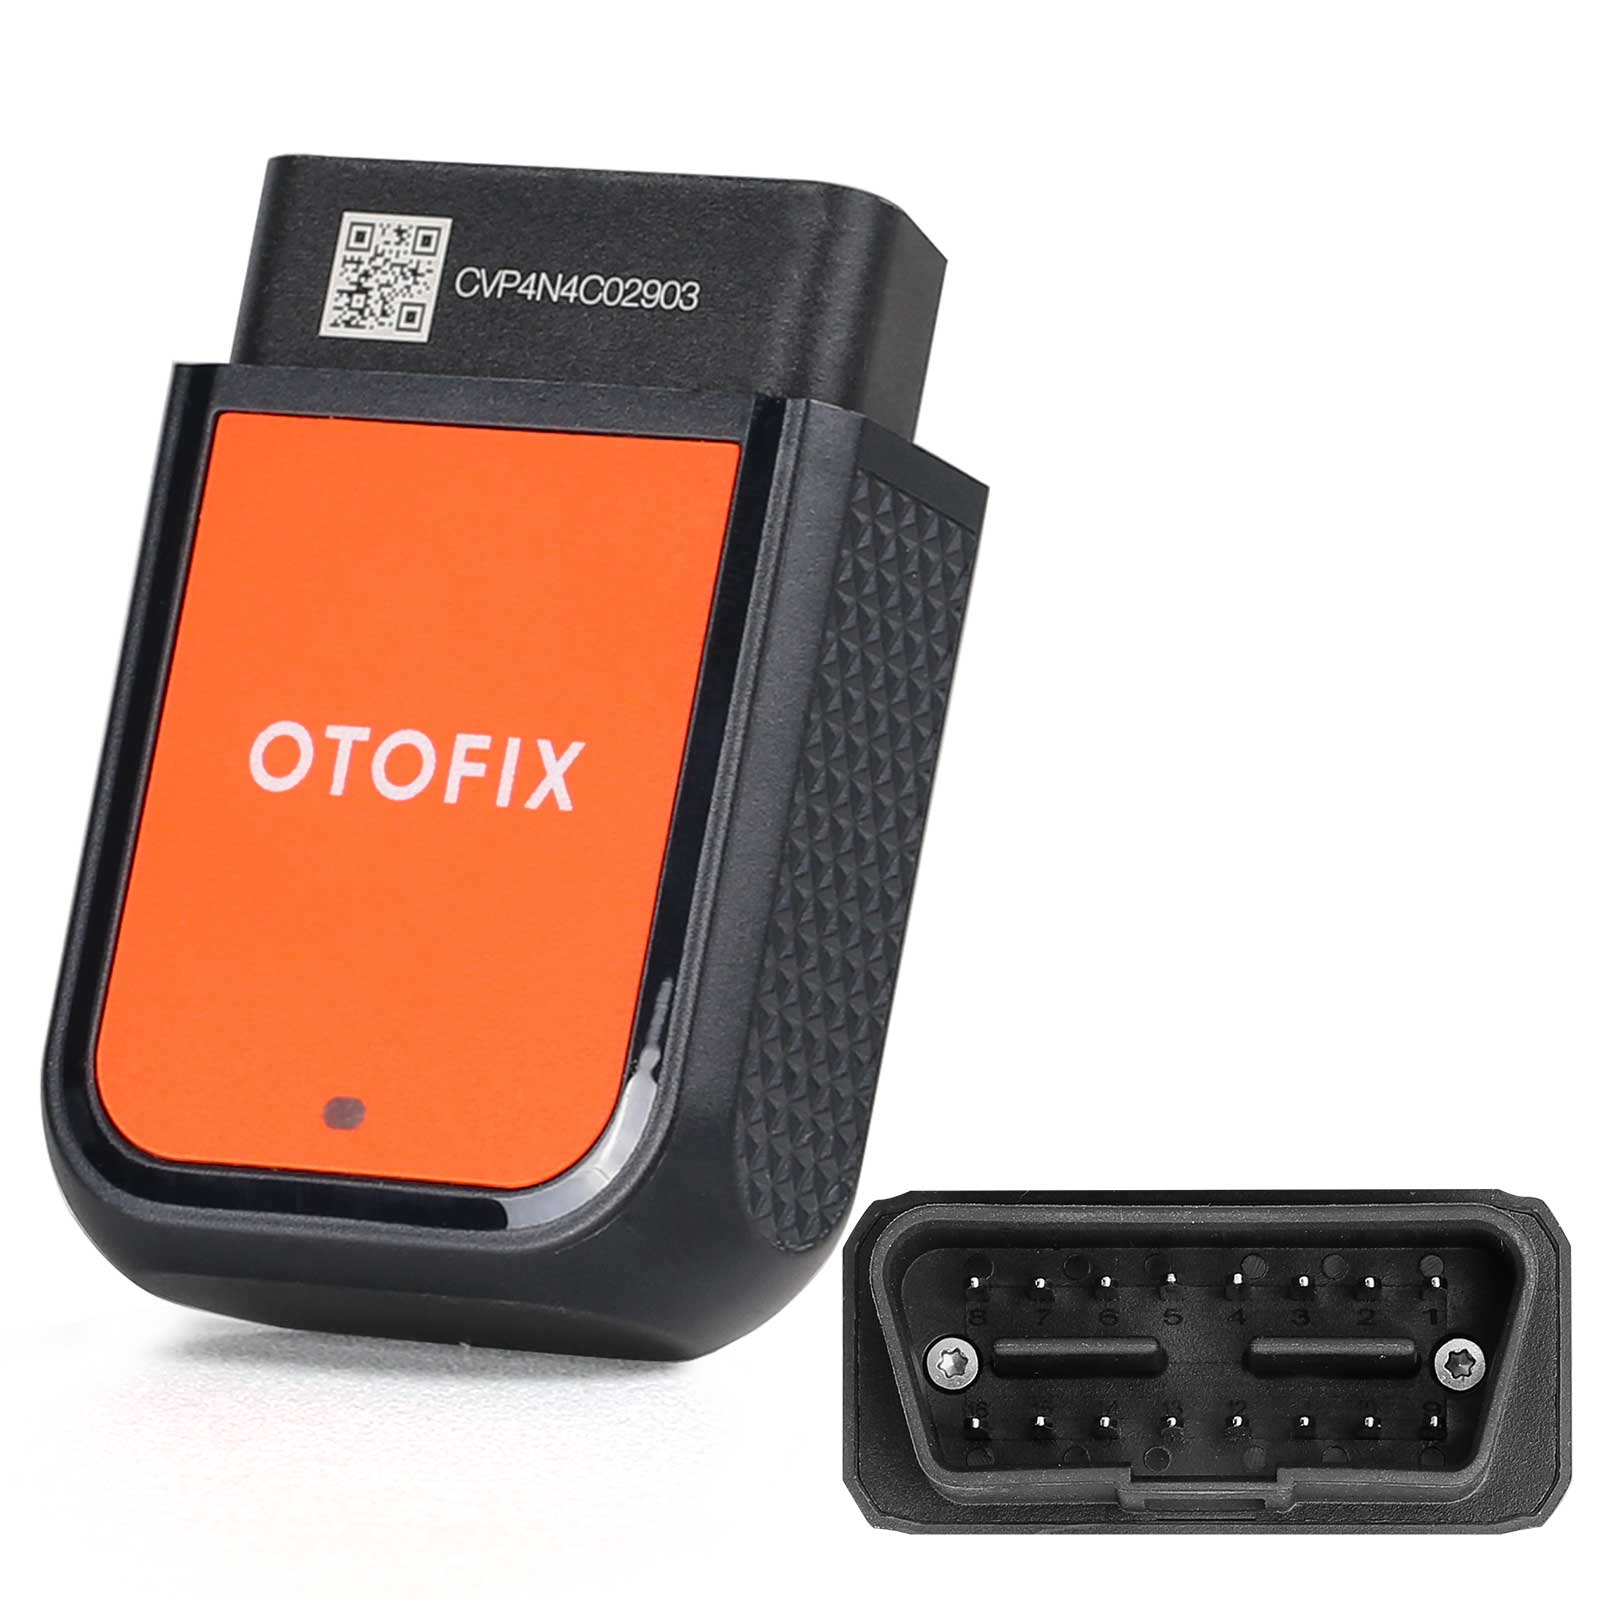 OTOFIX - Programmable Smart Key Watch Black Color with VCI